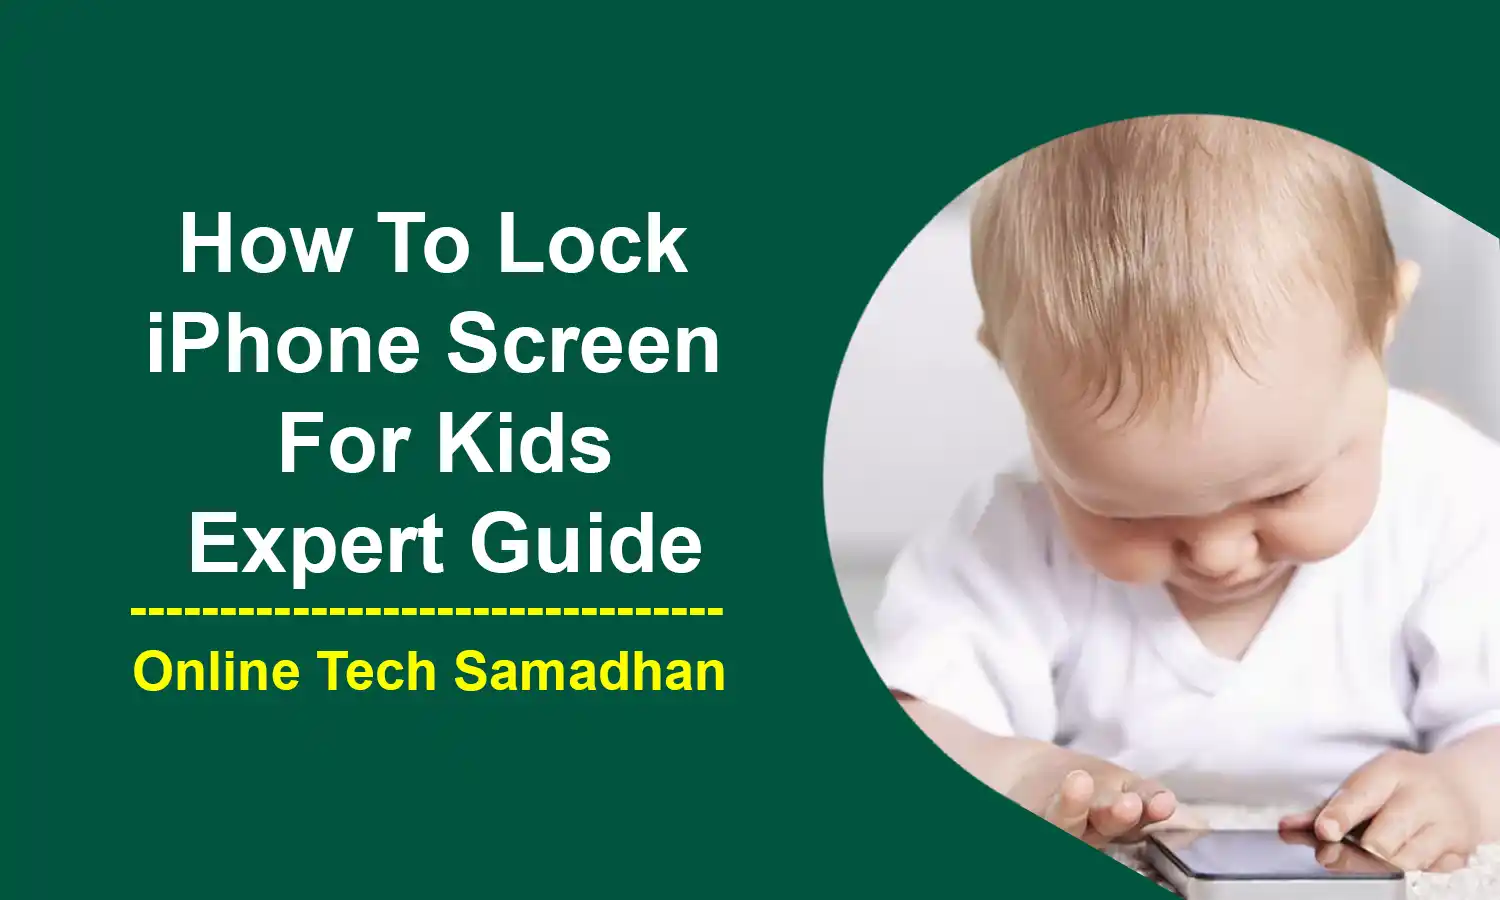 How To Lock iPhone Screen For Kids